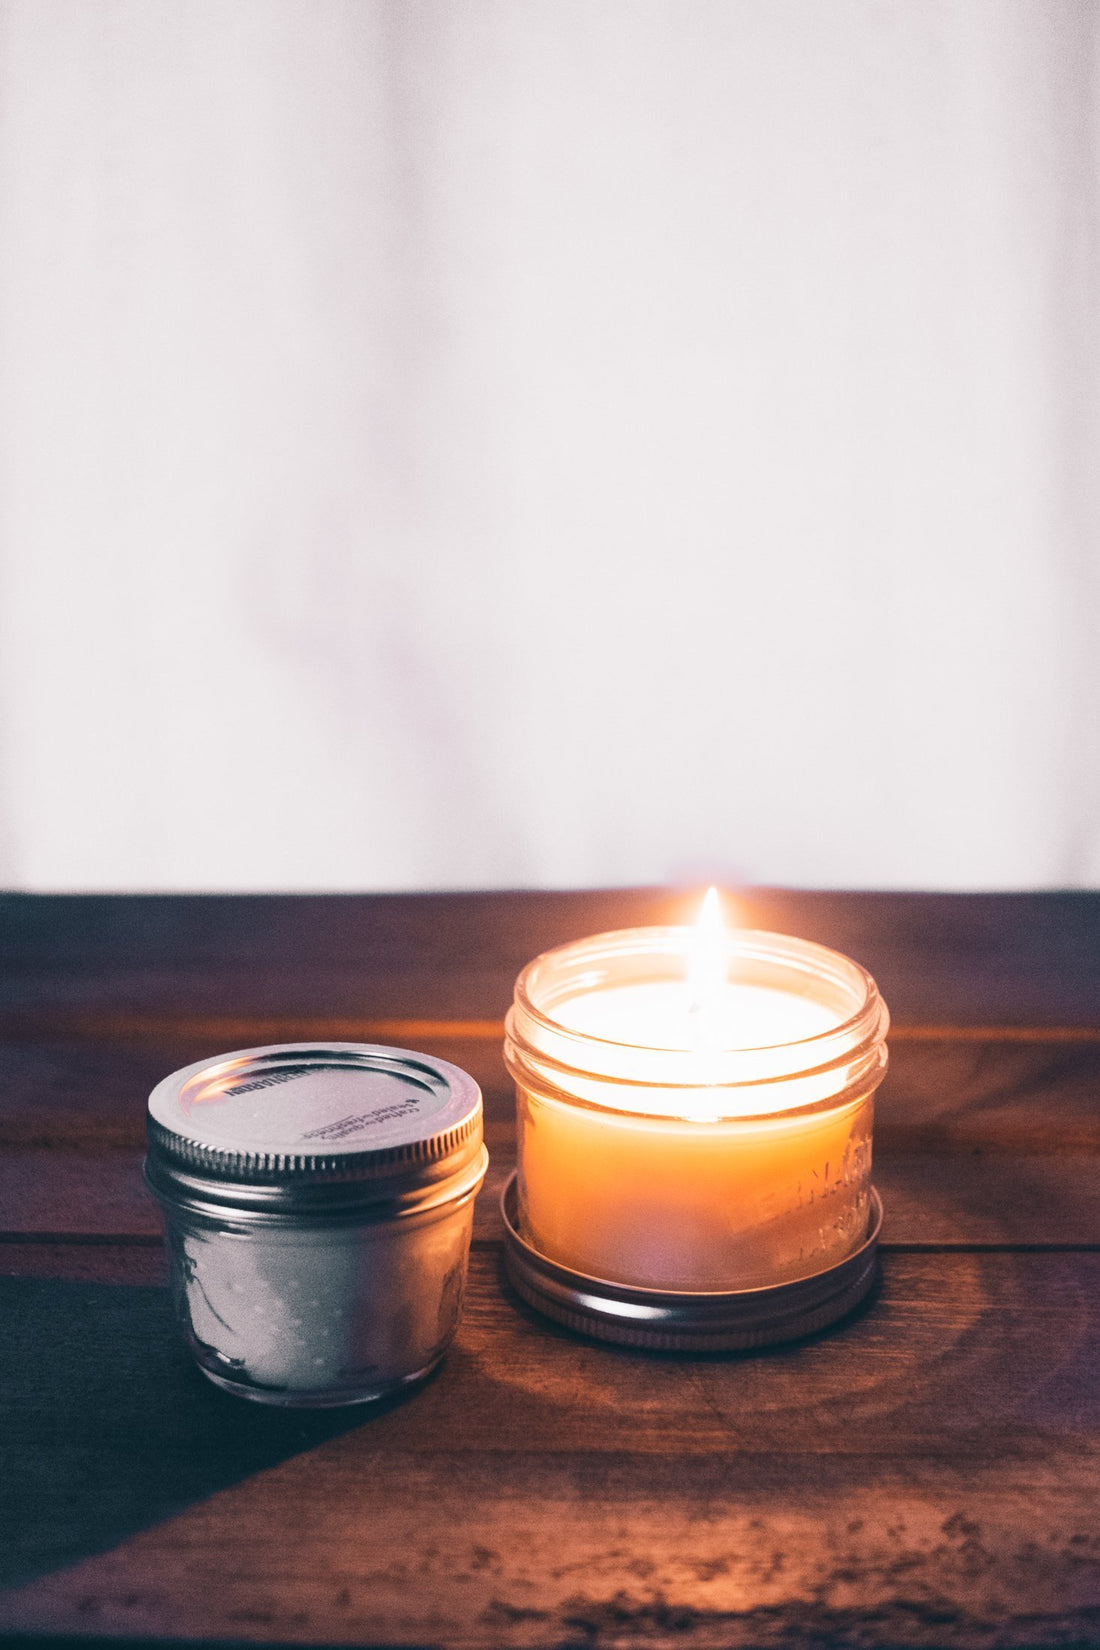 What Every Candle Burner Should Know About Candle Soot